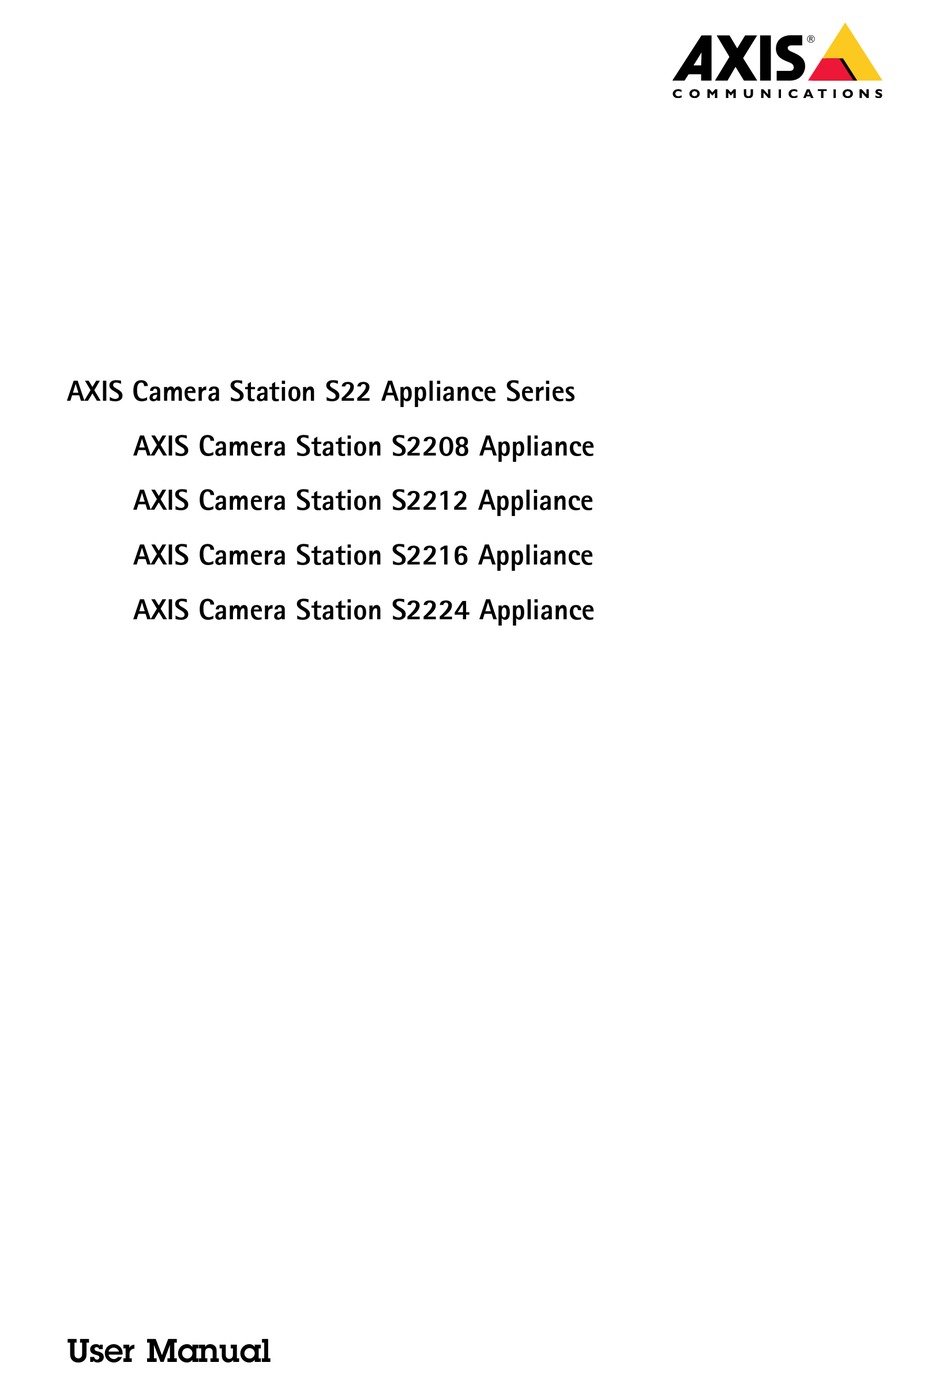 axis camera station s2224